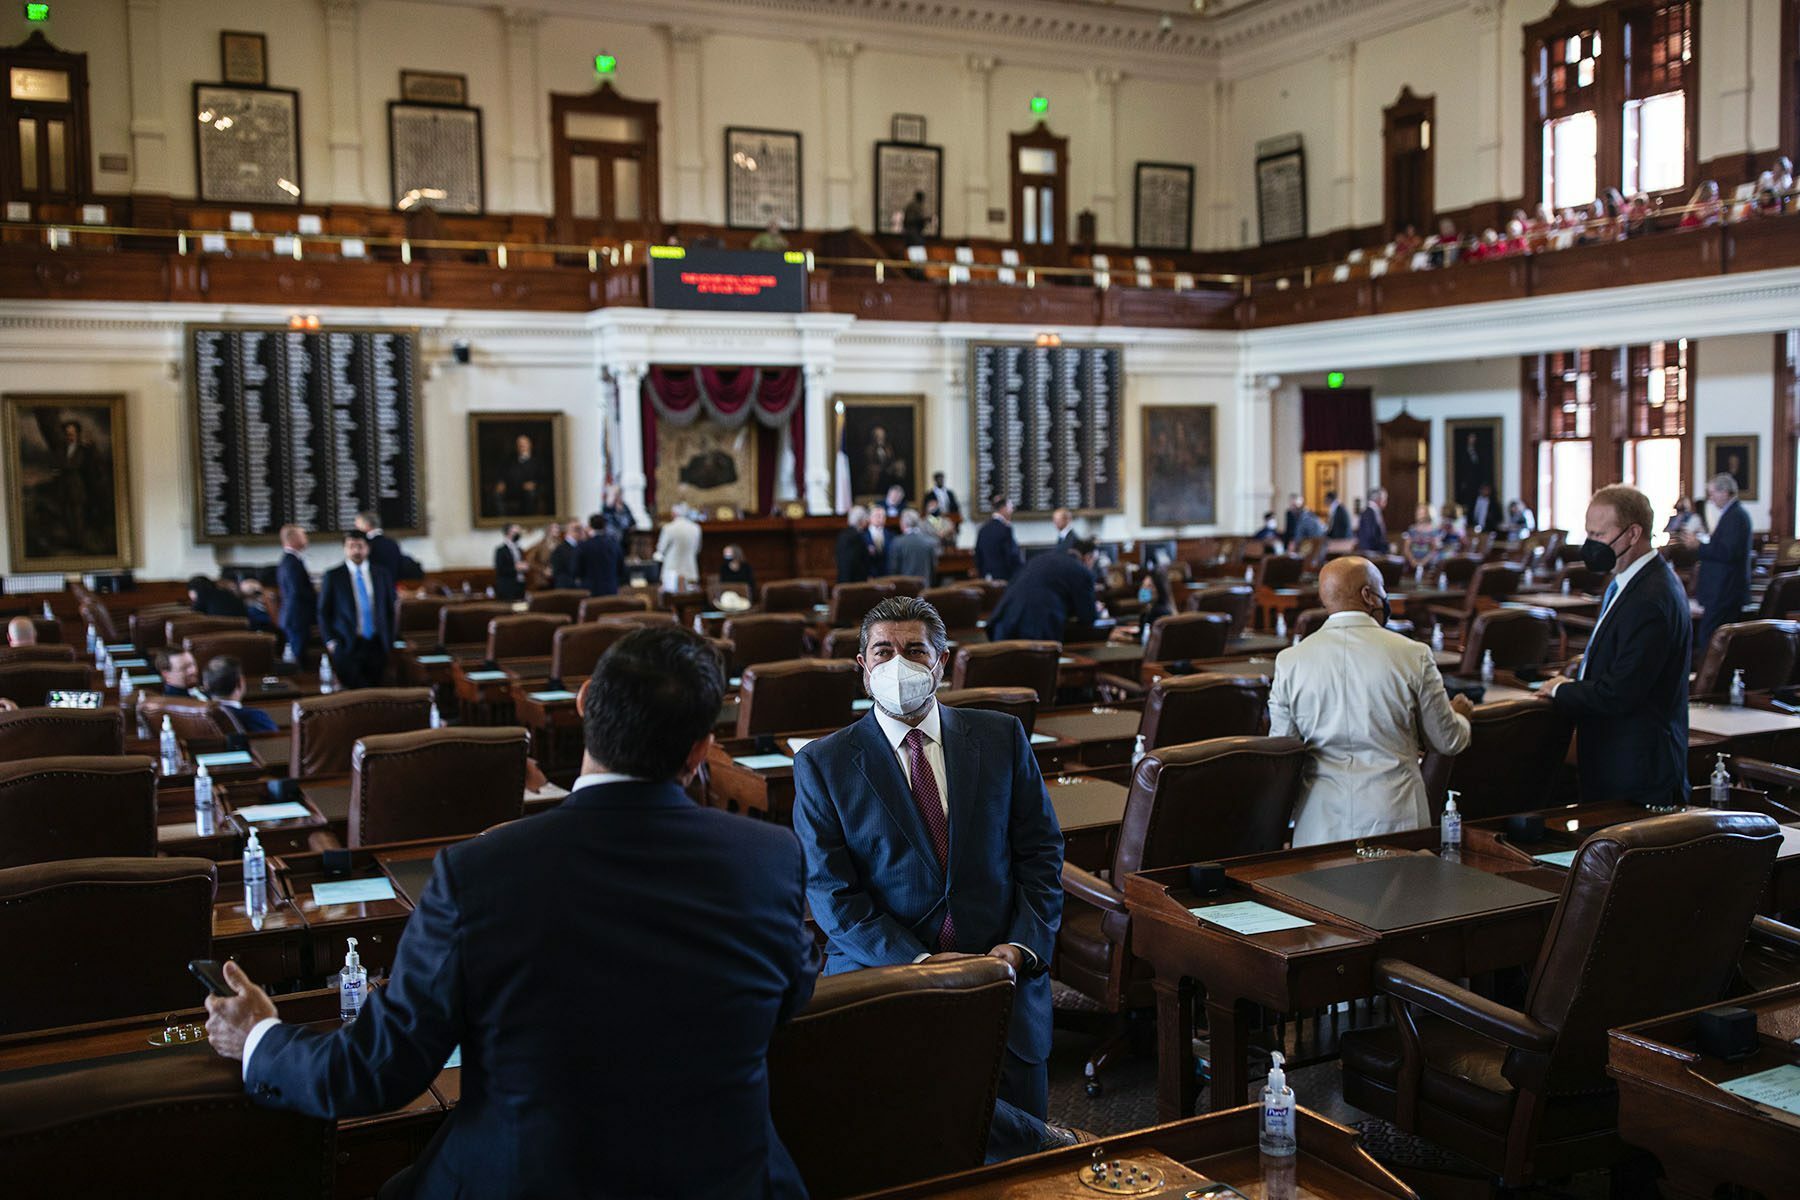 Texas state representatives gather in the House chamber.